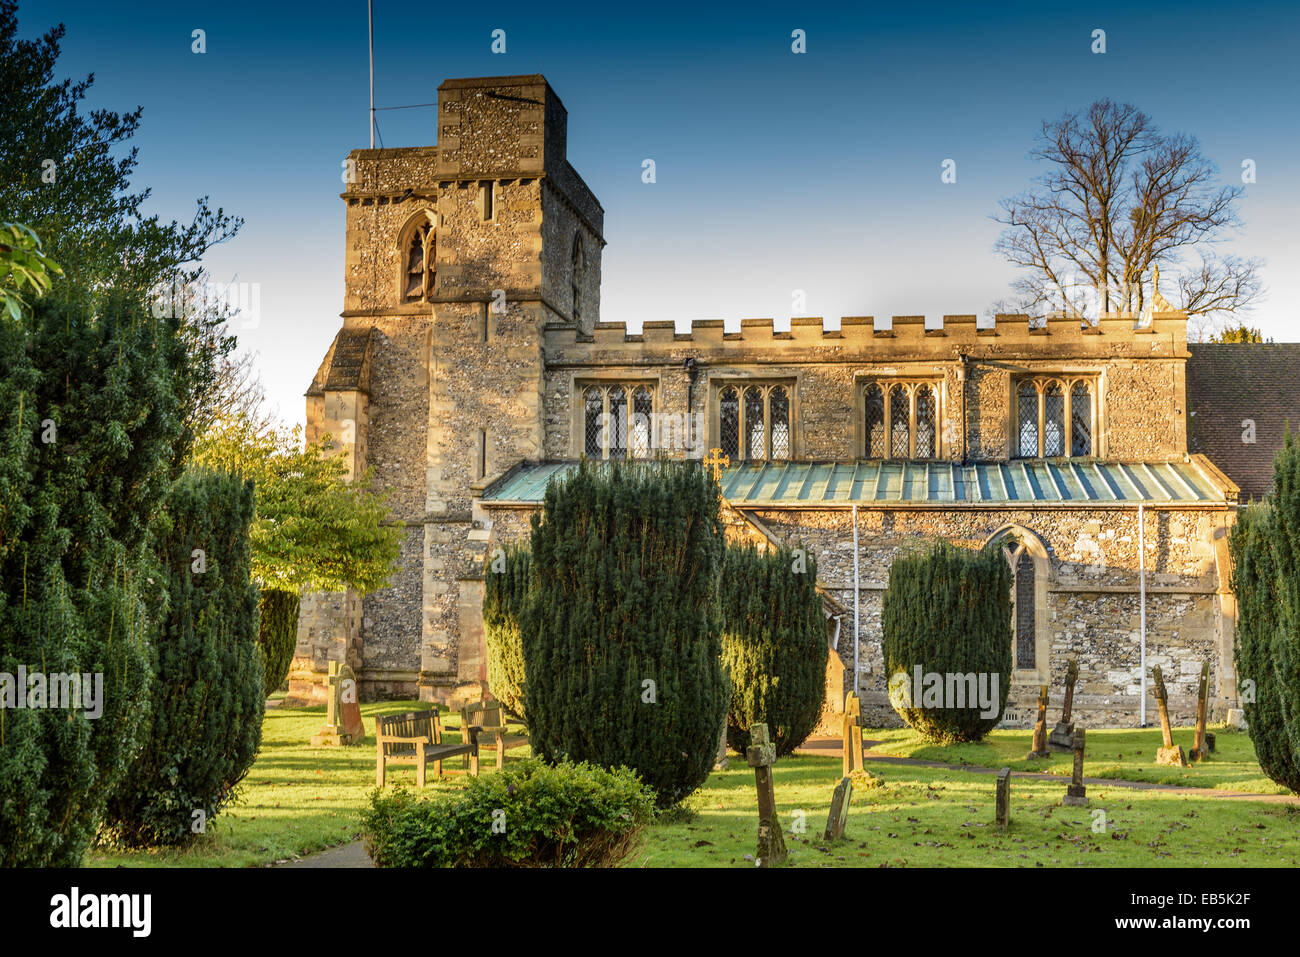 Monks Risborough Church in the late afternoon sun with yew trees and gravestones Stock Photo